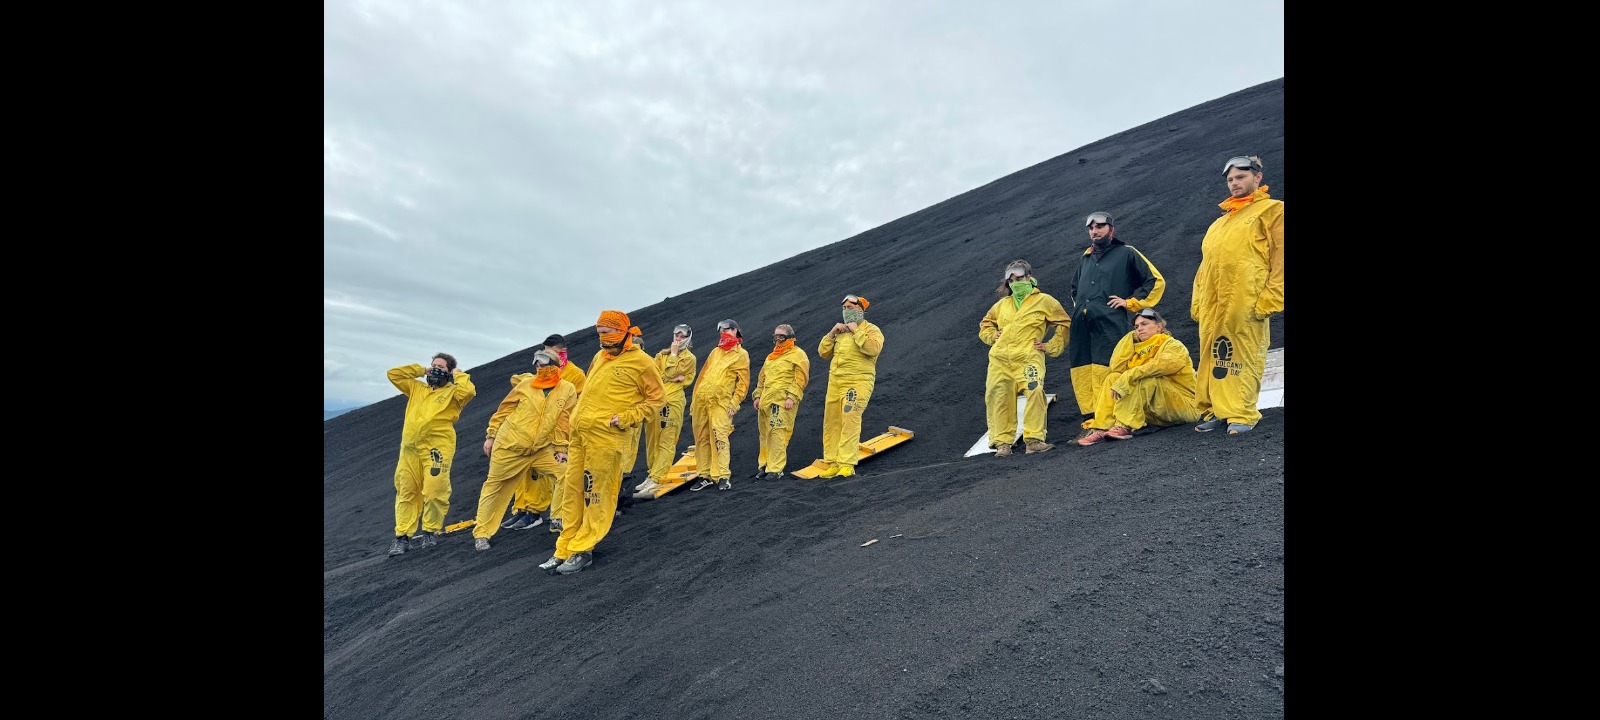 Thrilling Adventures and Recreation: Volcano Boarding Day